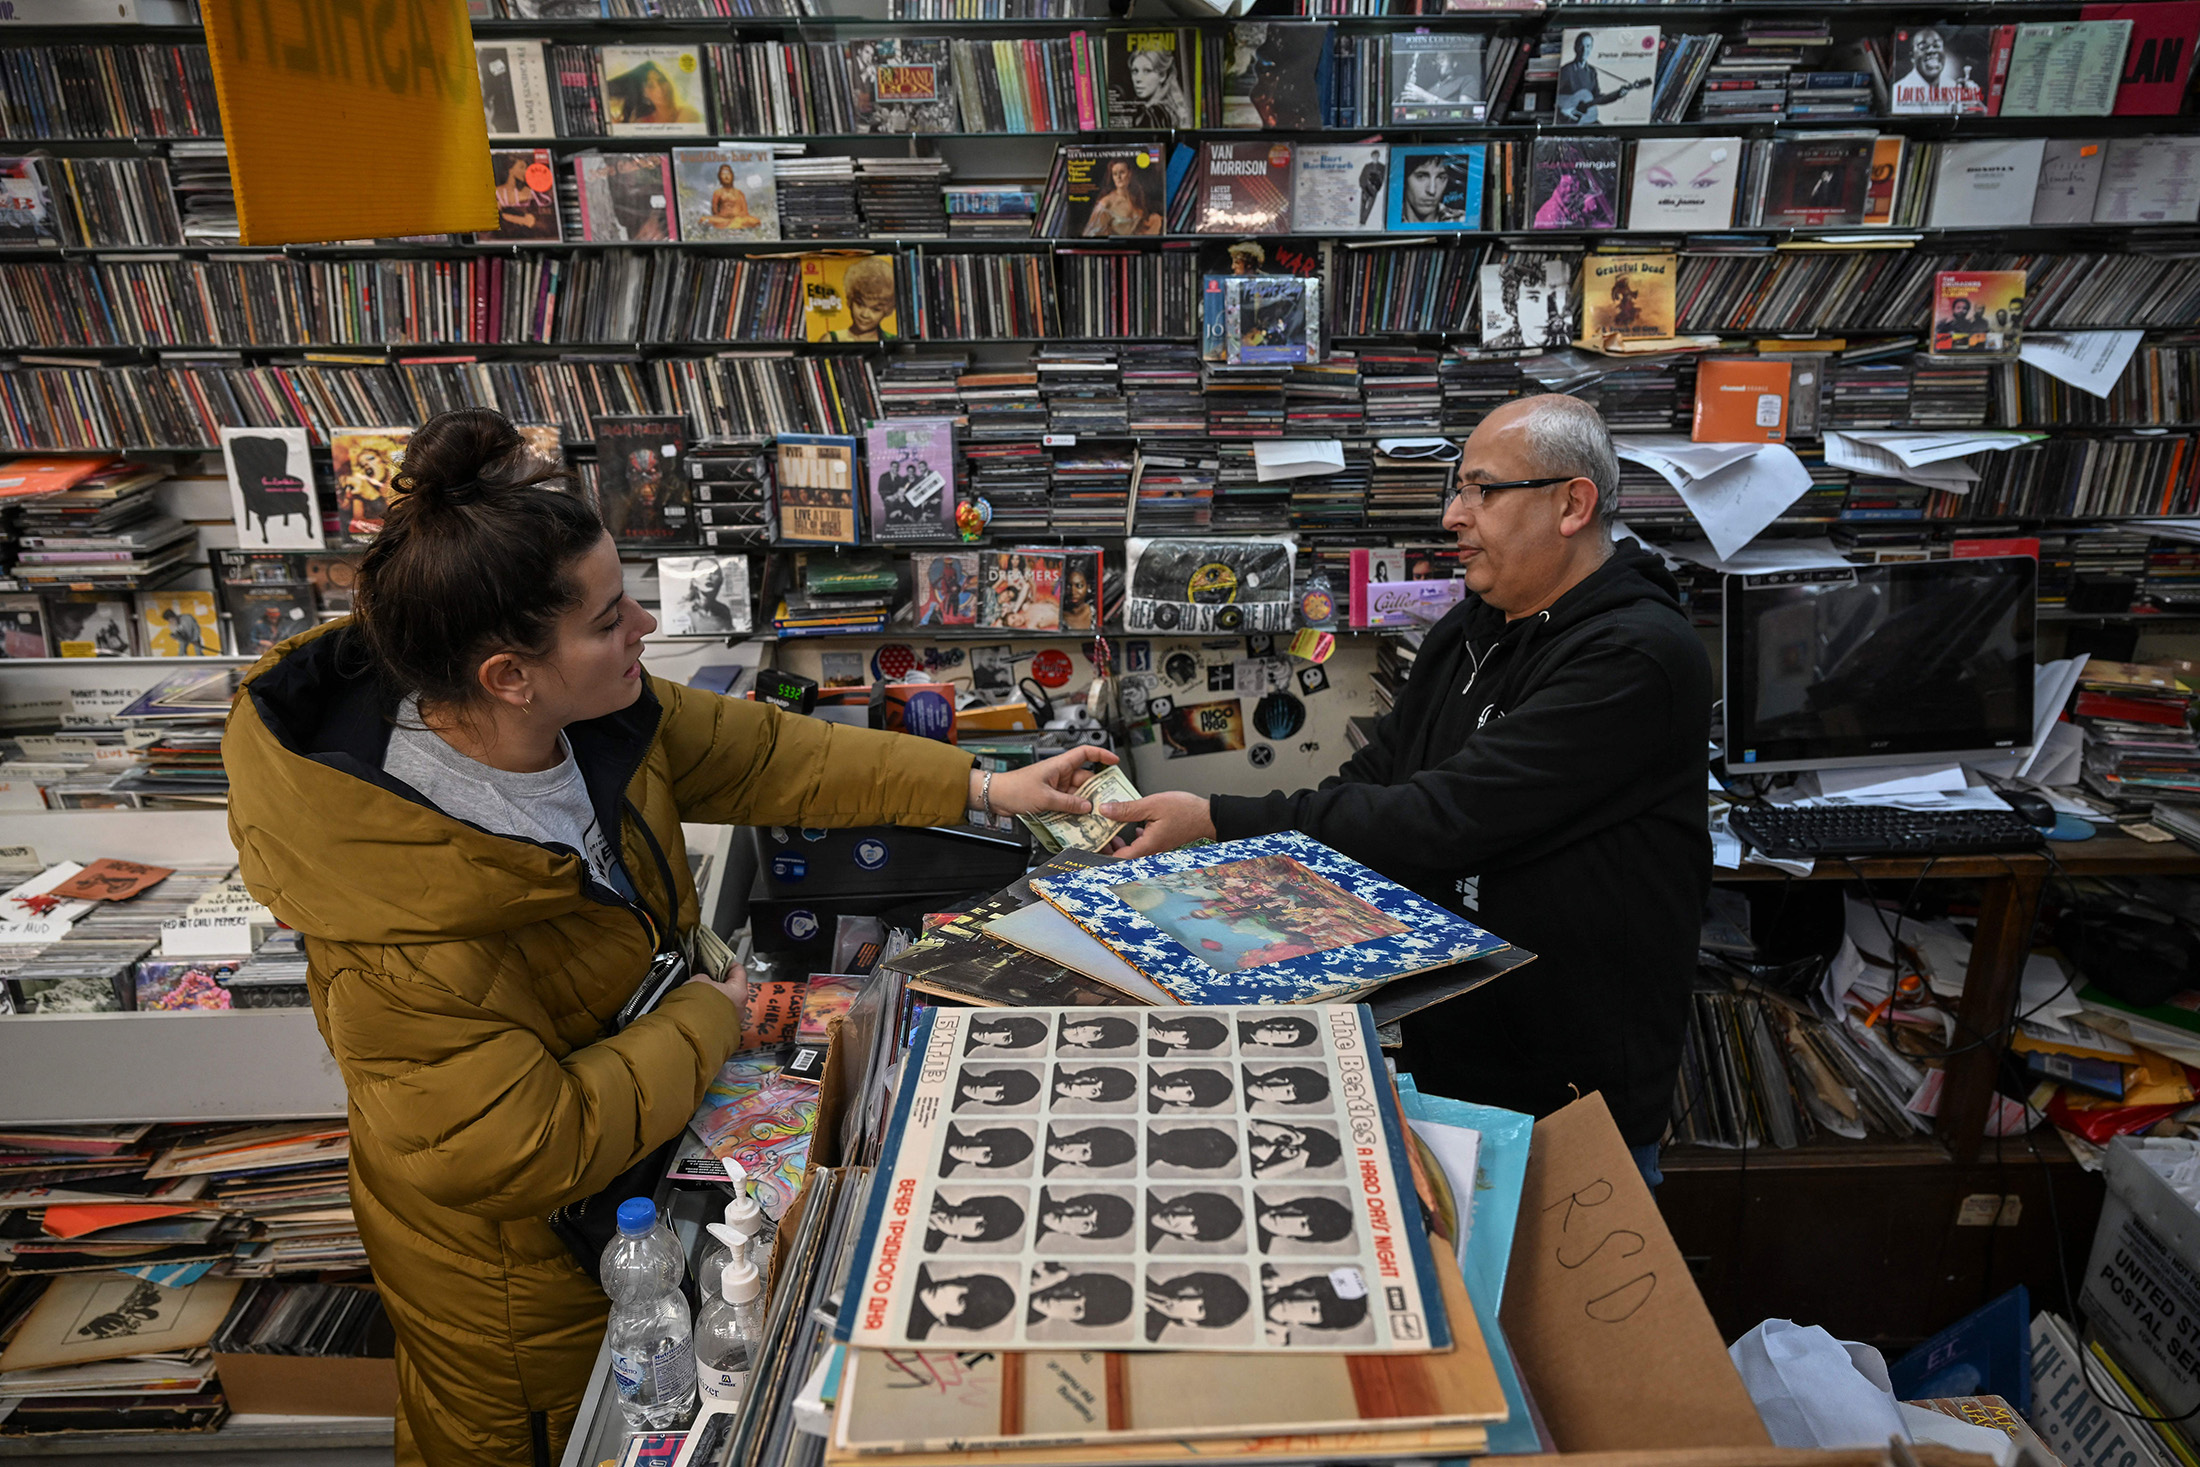 Vinyl sales rise as teenagers forego streaming – The Howler